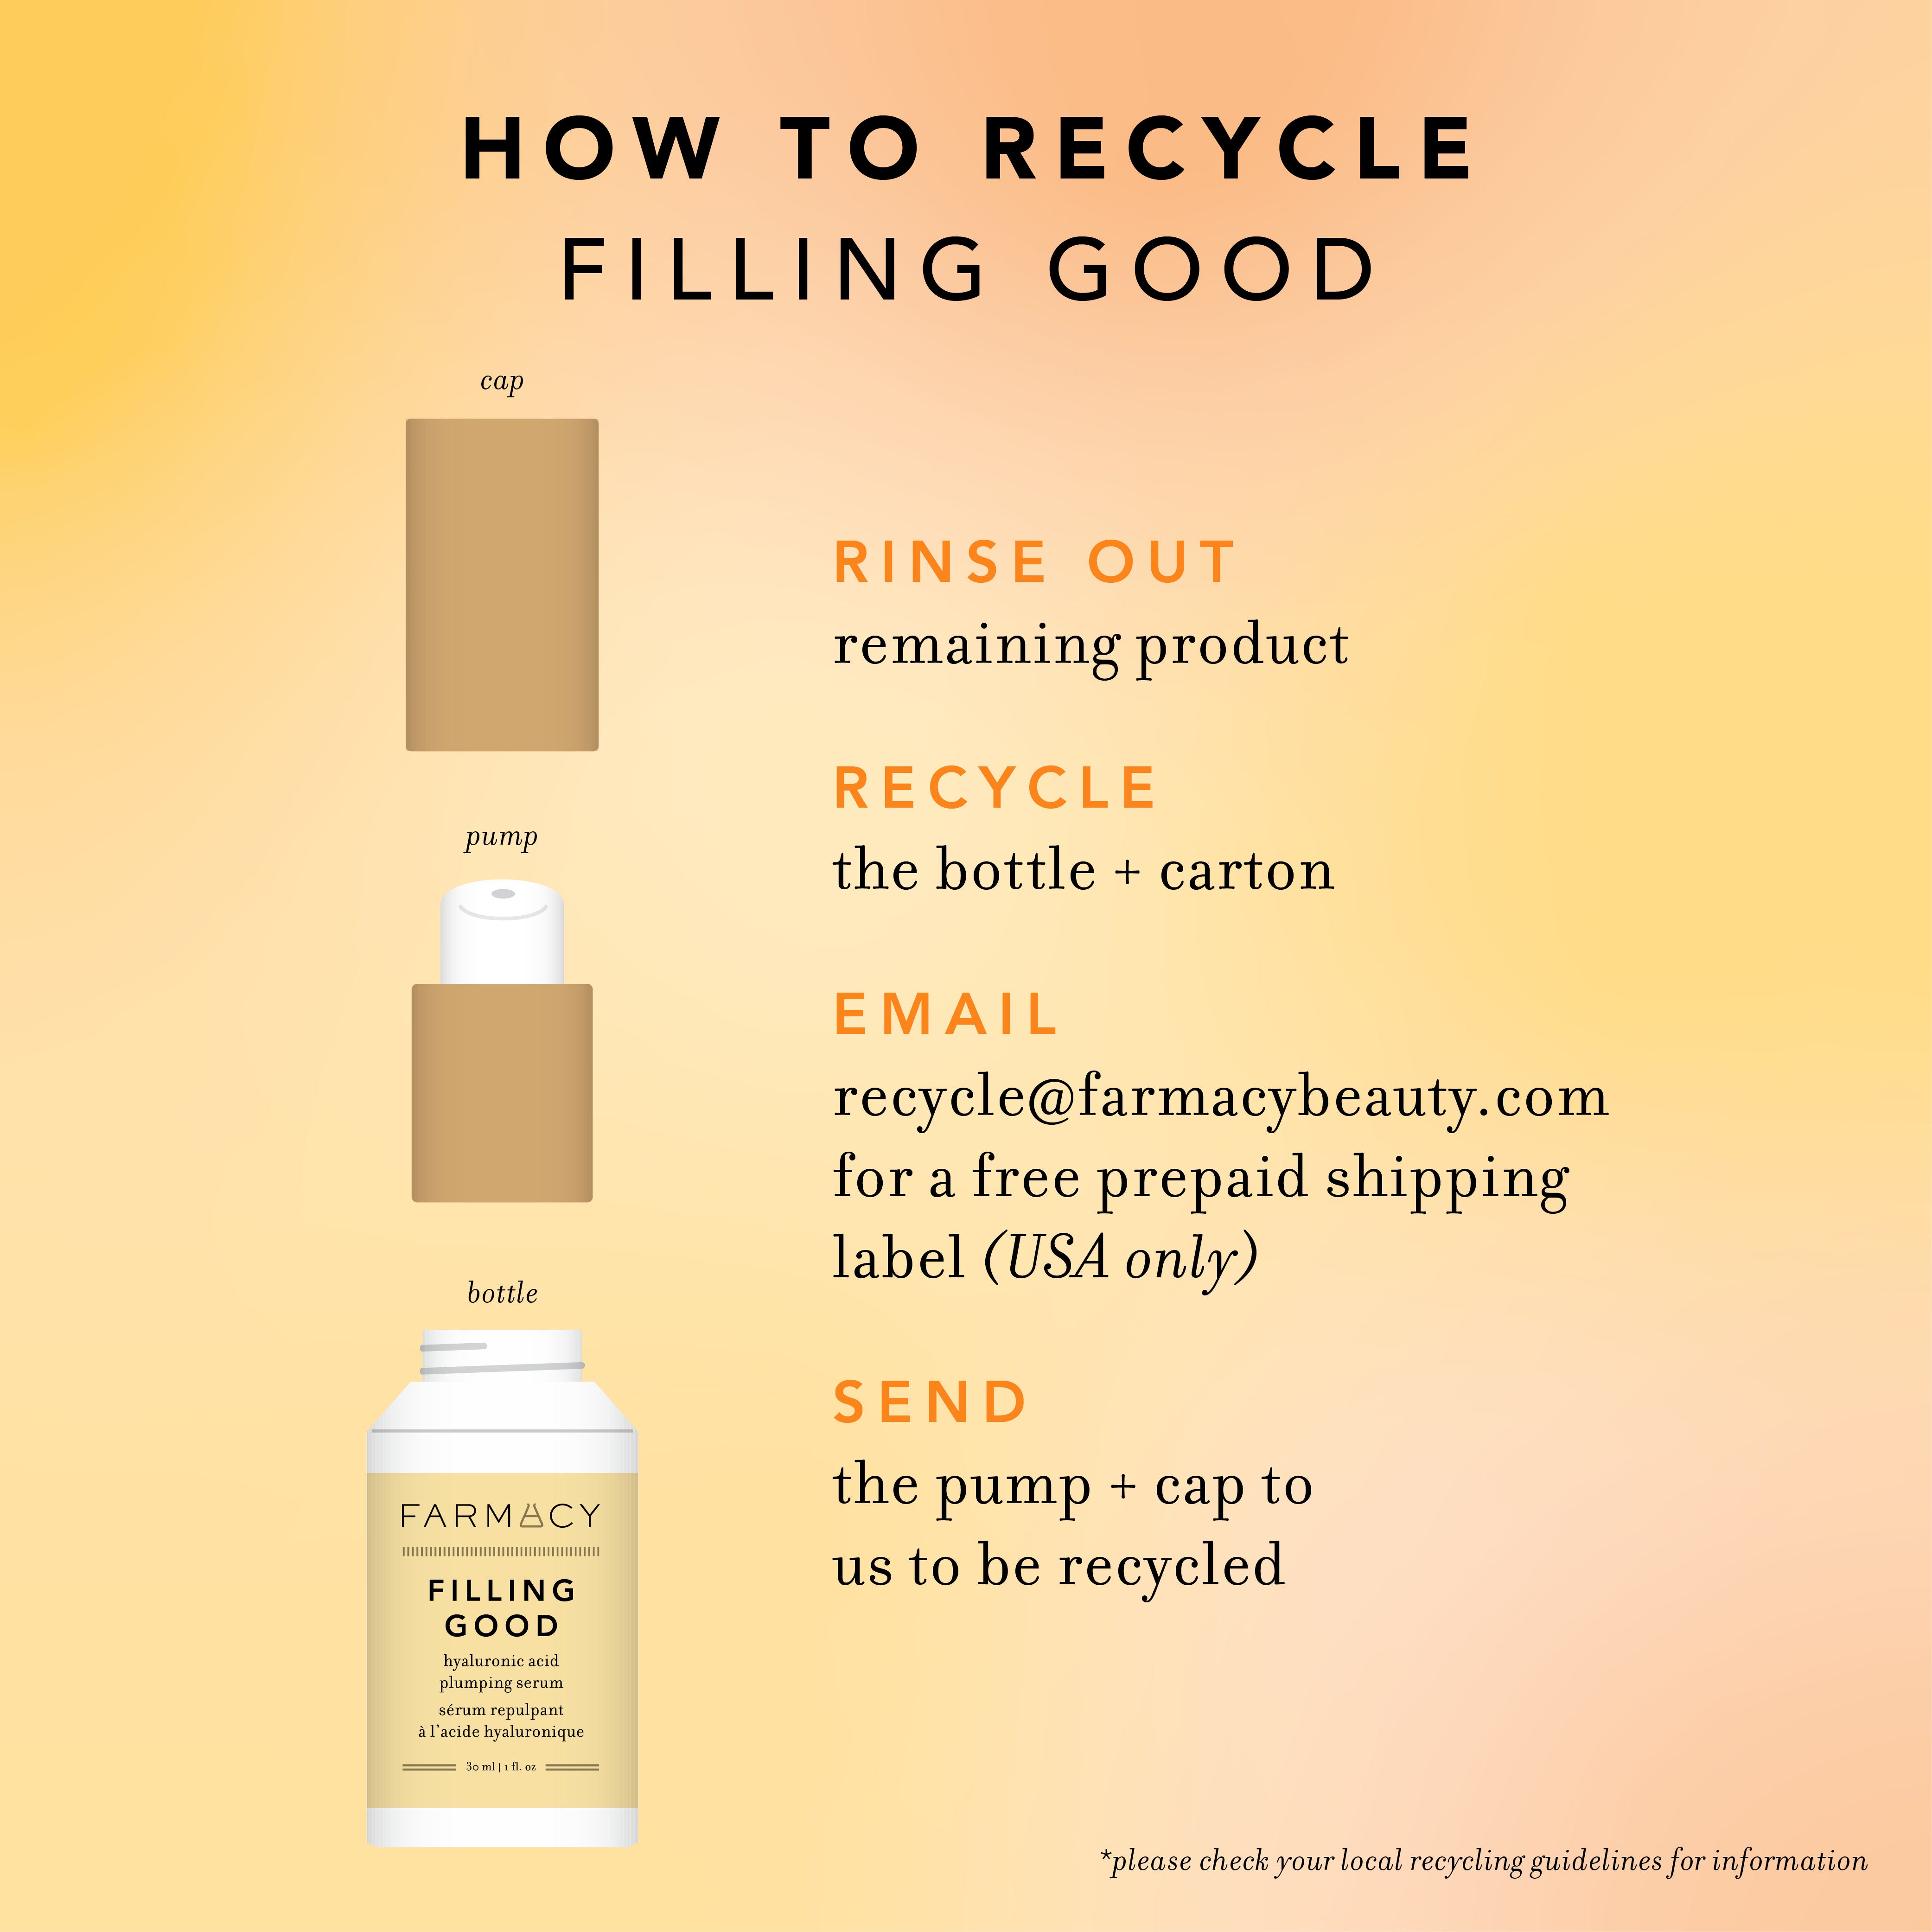 How to recycle Filling Good